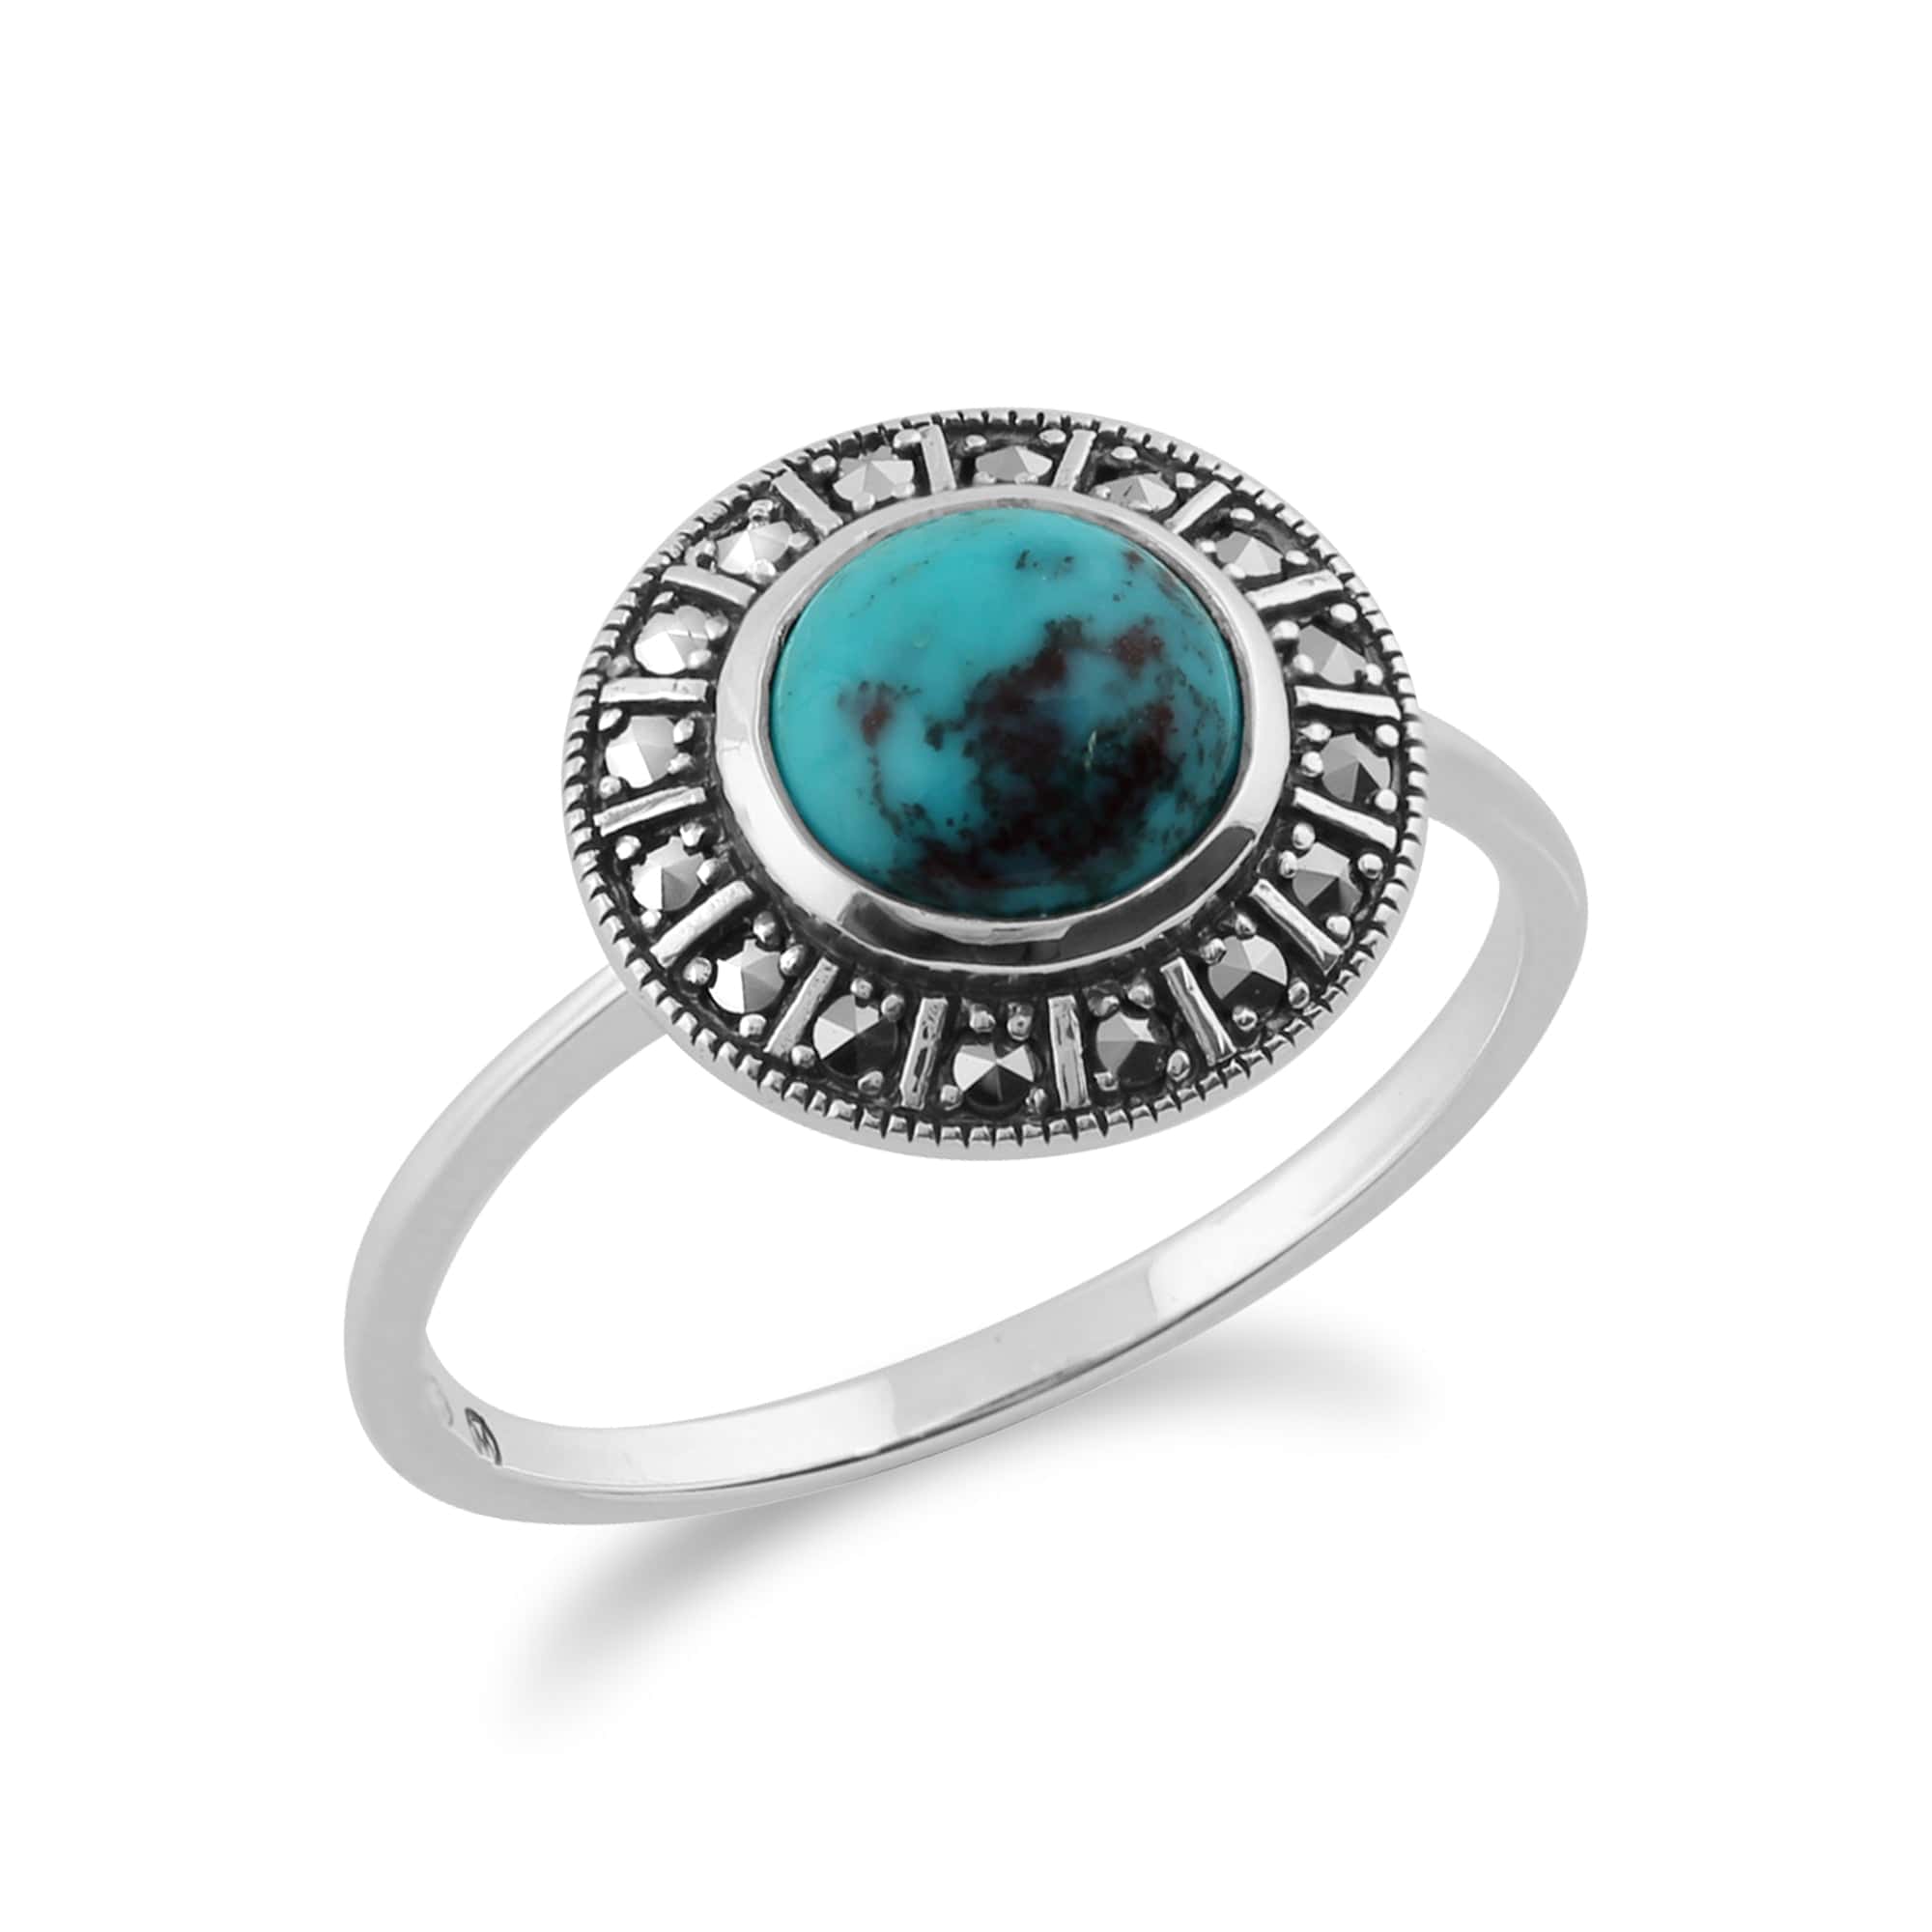 Art Deco Style Round Turquoise Cabochon & Marcasite Halo Ring in 925 Sterling Silver - Gemondo